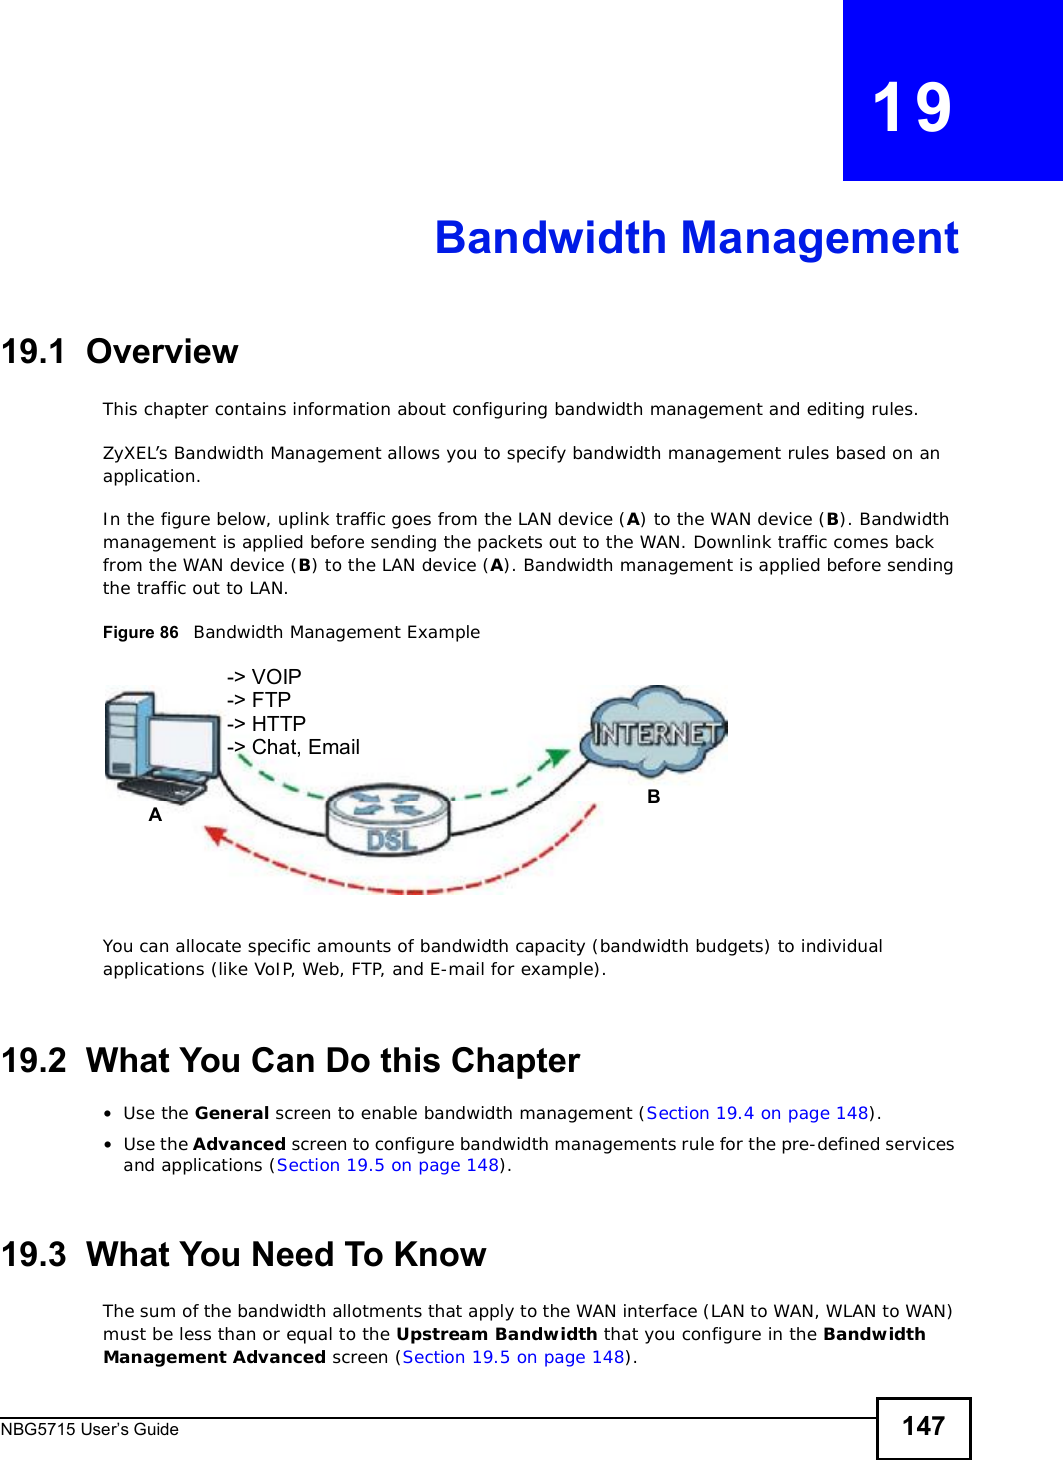 NBG5715 User’s Guide 147CHAPTER   19Bandwidth Management19.1  Overview This chapter contains information about configuring bandwidth management and editing rules.ZyXEL’s Bandwidth Management allows you to specify bandwidth management rules based on an application. In the figure below, uplink traffic goes from the LAN device (A) to the WAN device (B). Bandwidth management is applied before sending the packets out to the WAN. Downlink traffic comes back from the WAN device (B) to the LAN device (A). Bandwidth management is applied before sending the traffic out to LAN.Figure 86   Bandwidth Management ExampleYou can allocate specific amounts of bandwidth capacity (bandwidth budgets) to individual applications (like VoIP, Web, FTP, and E-mail for example).19.2  What You Can Do this Chapter•Use the General screen to enable bandwidth management (Section 19.4 on page 148).•Use the Advanced screen to configure bandwidth managements rule for the pre-defined services and applications (Section 19.5 on page 148).19.3  What You Need To KnowThe sum of the bandwidth allotments that apply to the WAN interface (LAN to WAN, WLAN to WAN) must be less than or equal to the Upstream Bandwidth that you configure in the Bandwidth ManagementAdvanced screen (Section 19.5 on page 148).AB-&gt; VOIP-&gt; FTP-&gt; HTTP-&gt; Chat, Email